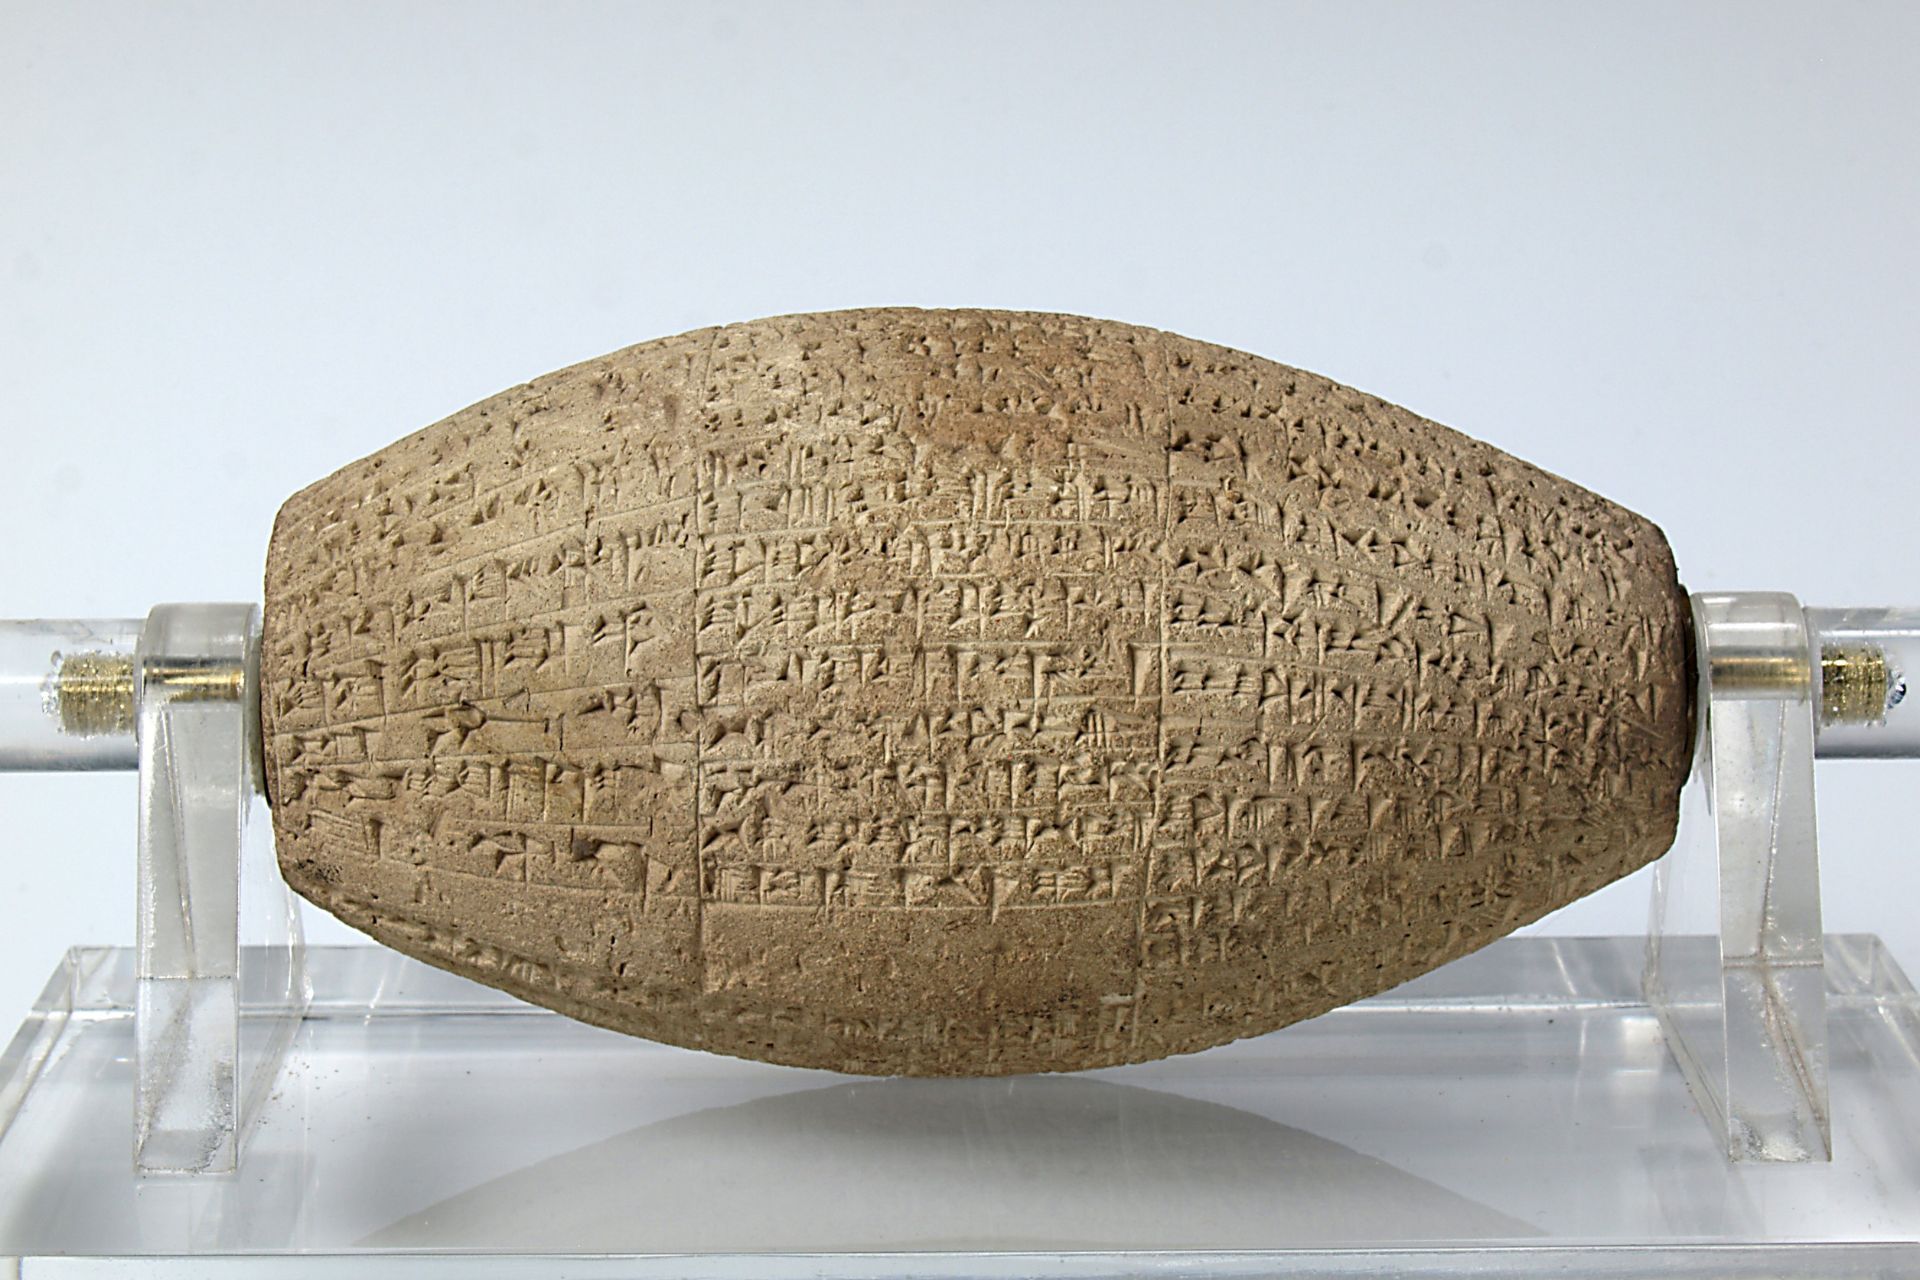 Barrel cylinder with cuneiform inscription dating to the reign of the Neo-Babylonian king Nebuchadnezzar II, 599 BCE